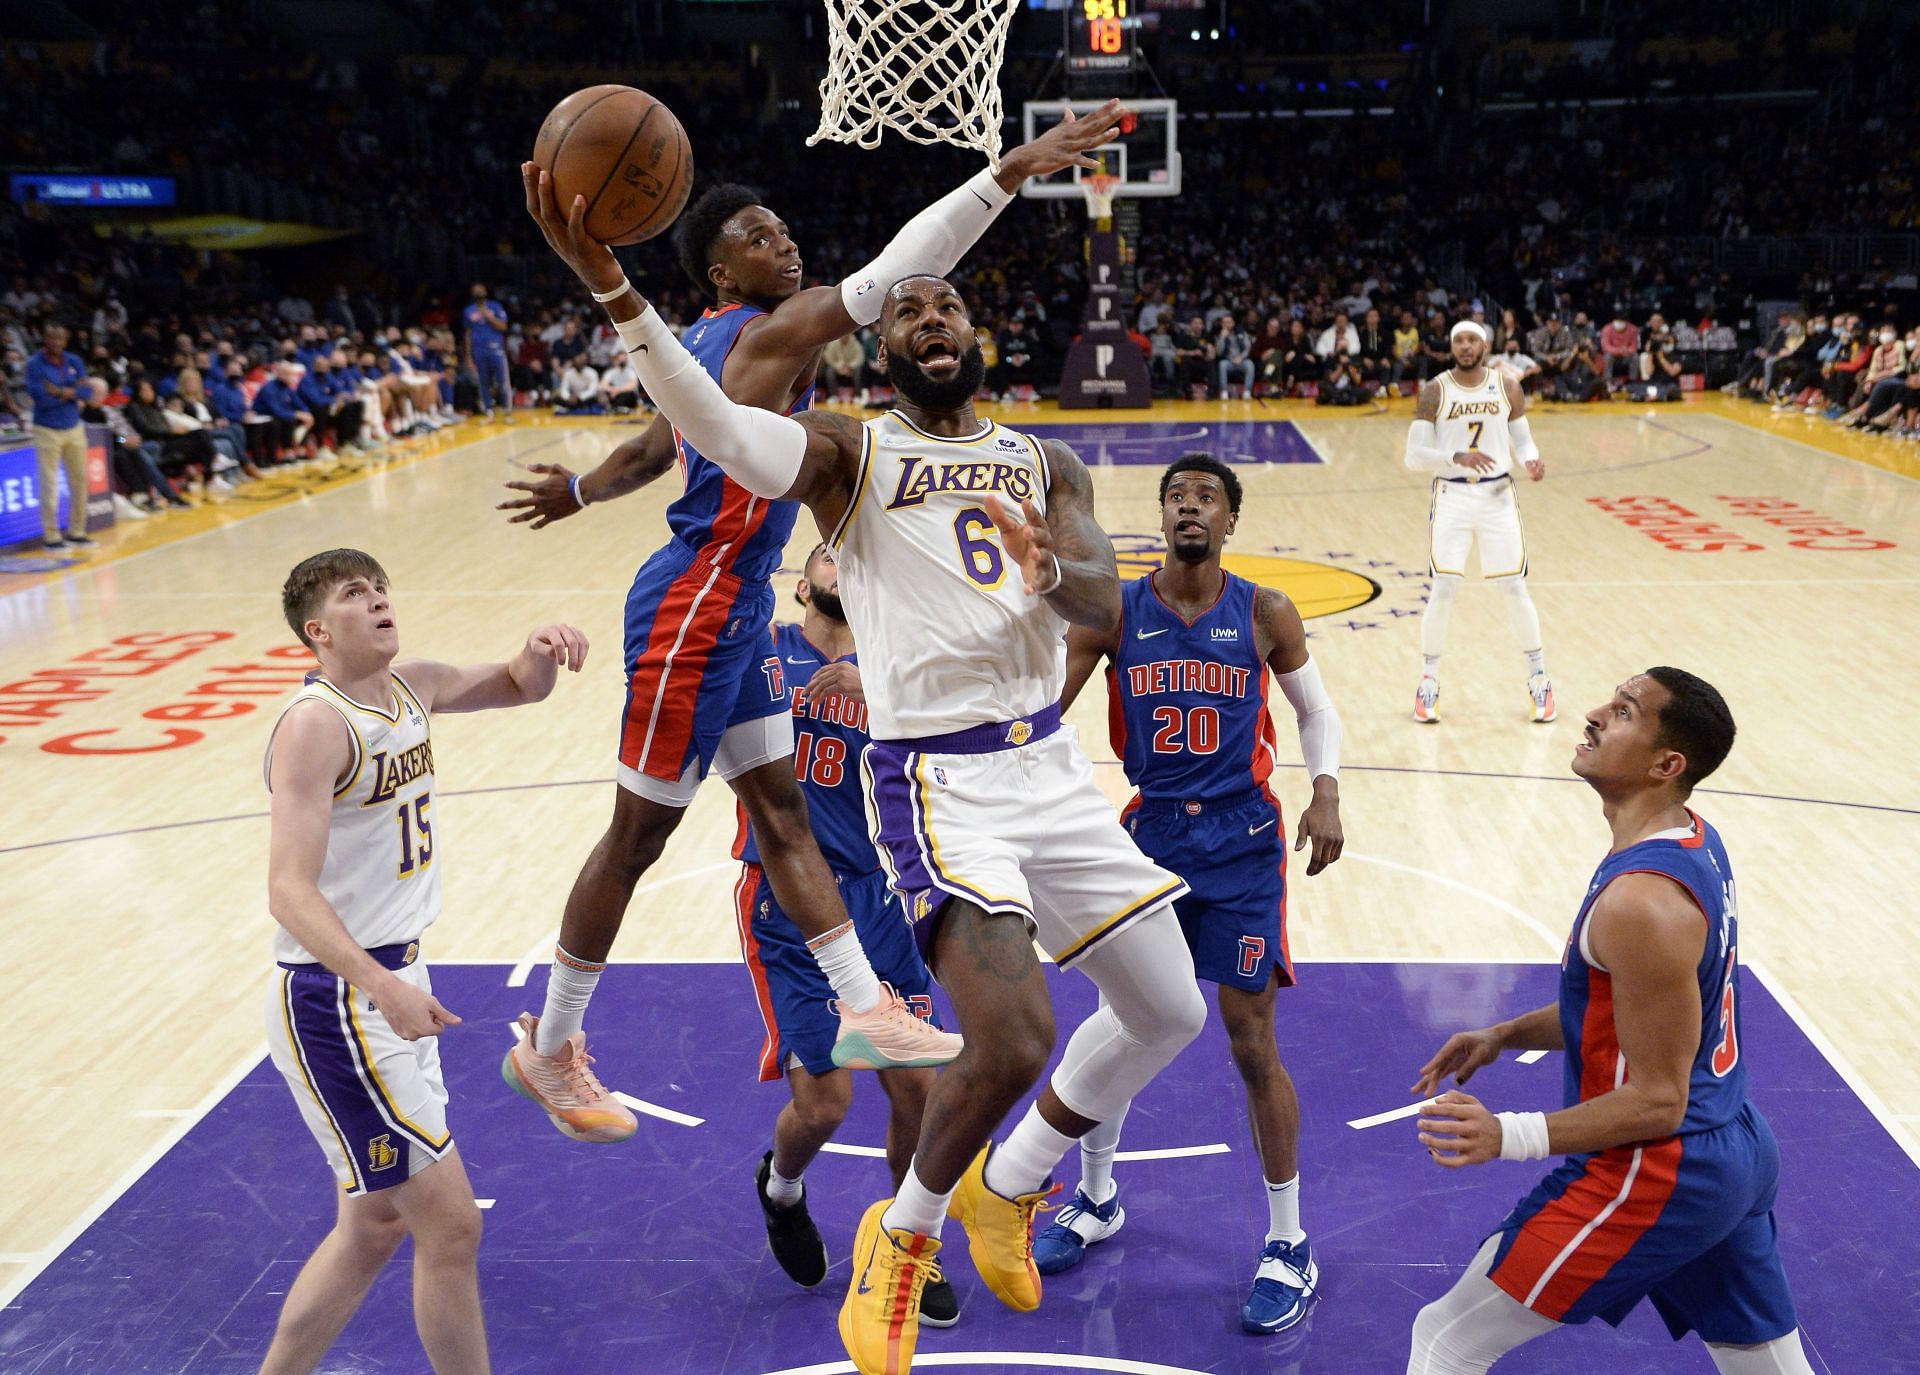 LA Lakers All-Star LeBron James goes up for a layup